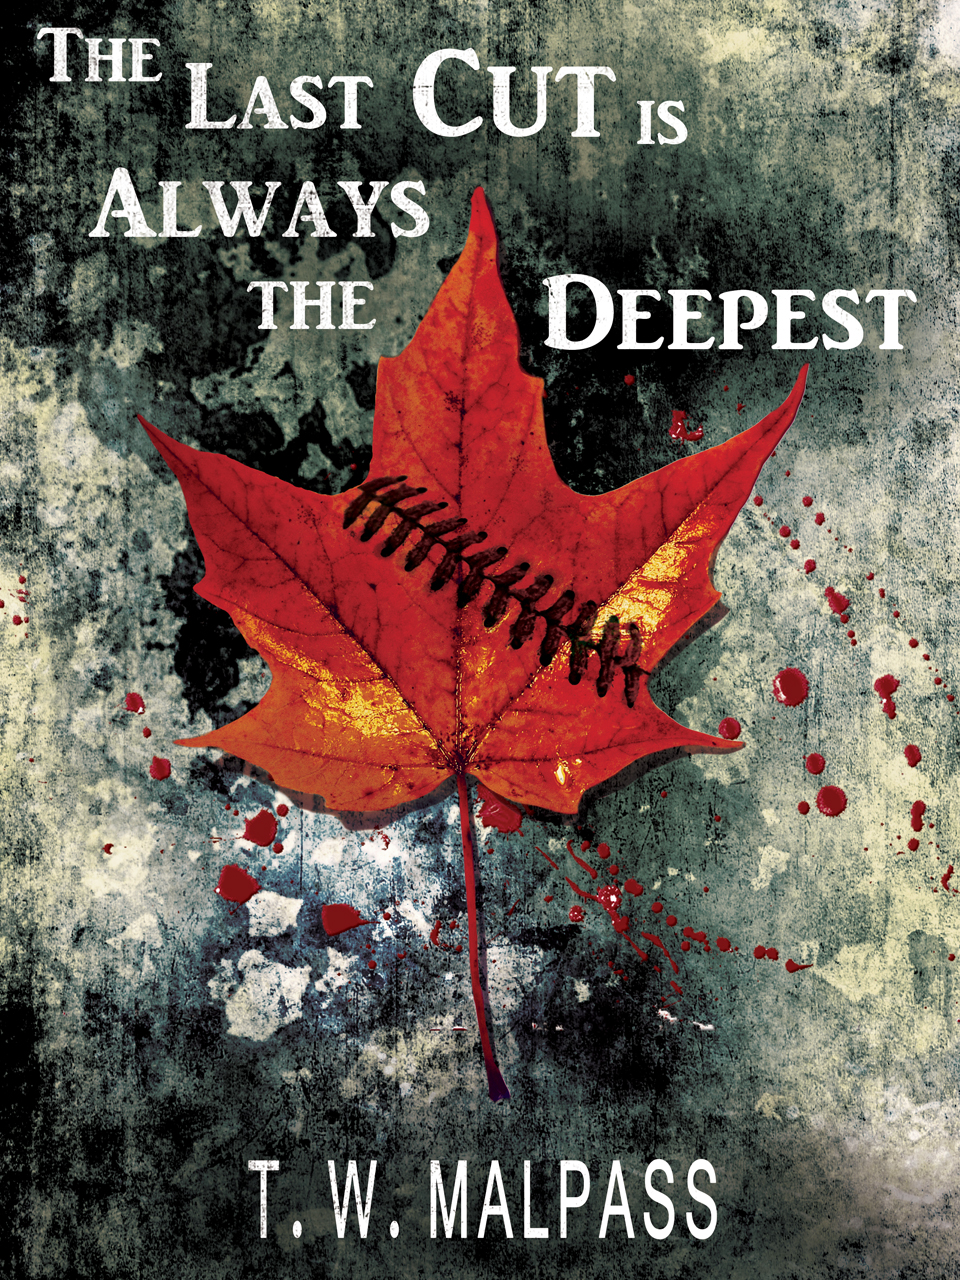 FREE: The Last Cut is Always the Deepest by T.W. Malpass